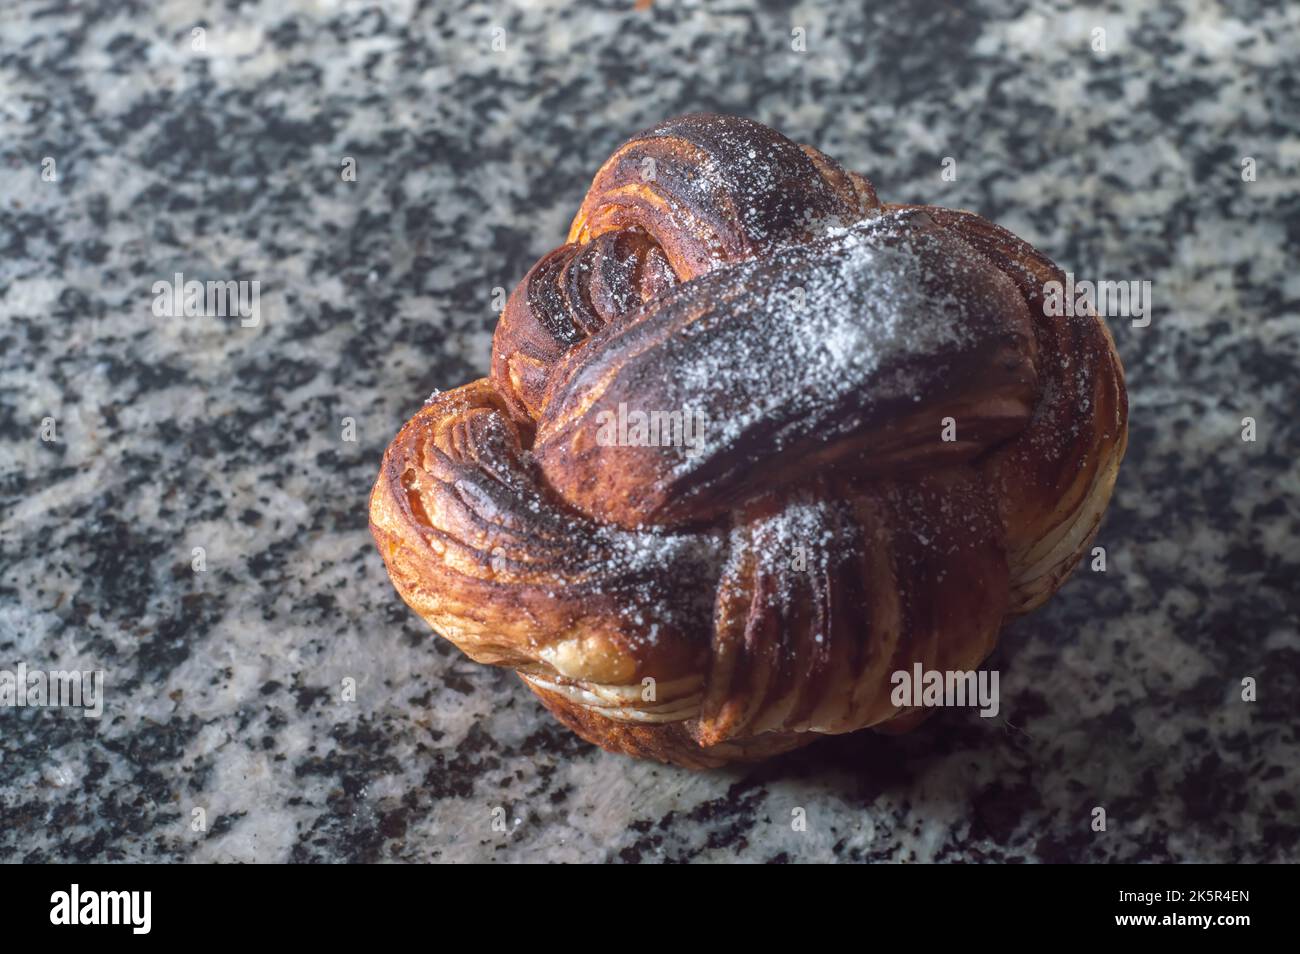 Pastry with sugar dusting on a rustic wood table. Close up with directional lighting for texture detail and copy space for text.. Stock Photo